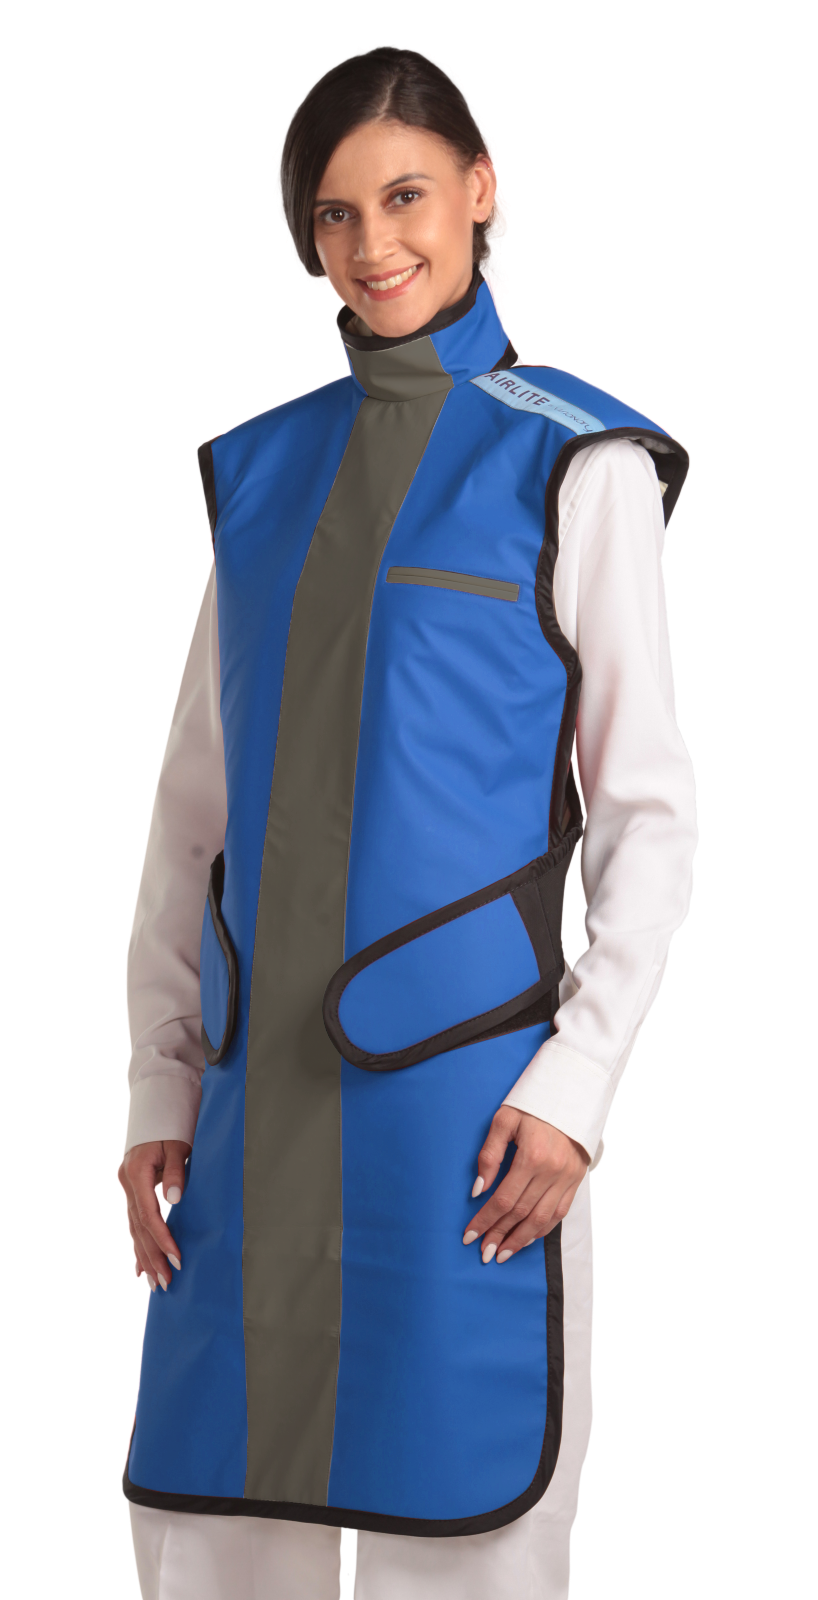 Frontal left-side view of a female model wearing a coat apron with an integrated thyroid guard. The apron is electric blue in color with a grey center line and has velcro fasteners by the sides.